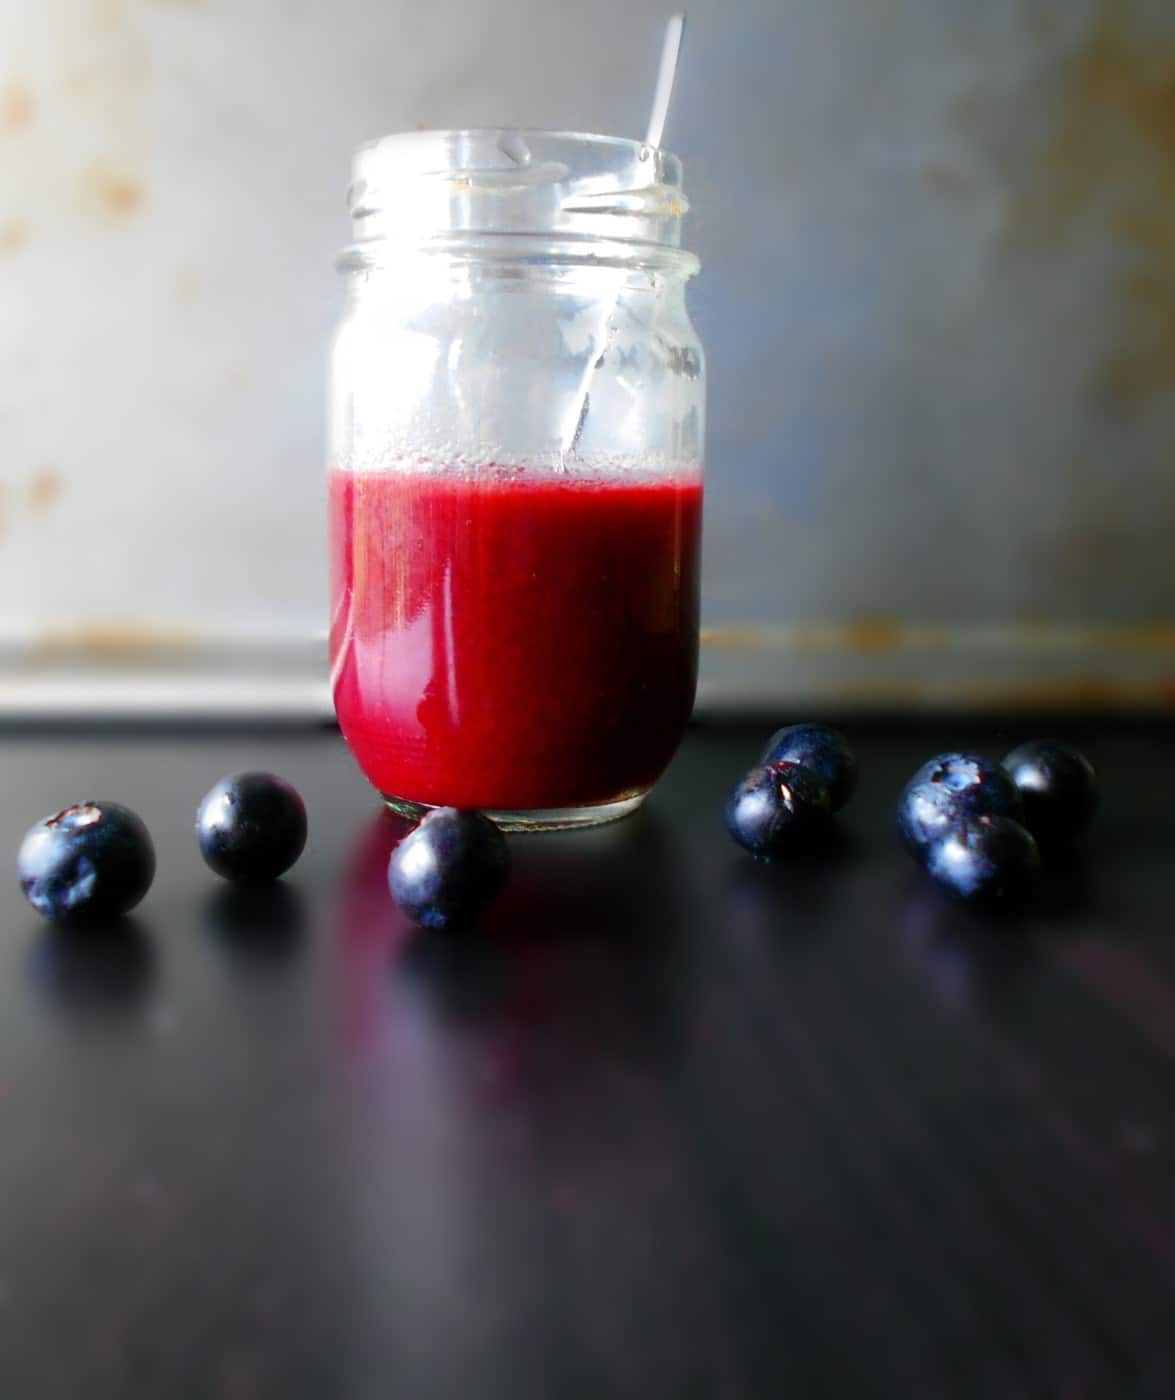 Blueberry Vinaigrette - Quick and simple vinaigrette for any salad. Goes great on any Mediterranean salad, like a Mediterranean Tomato Salad